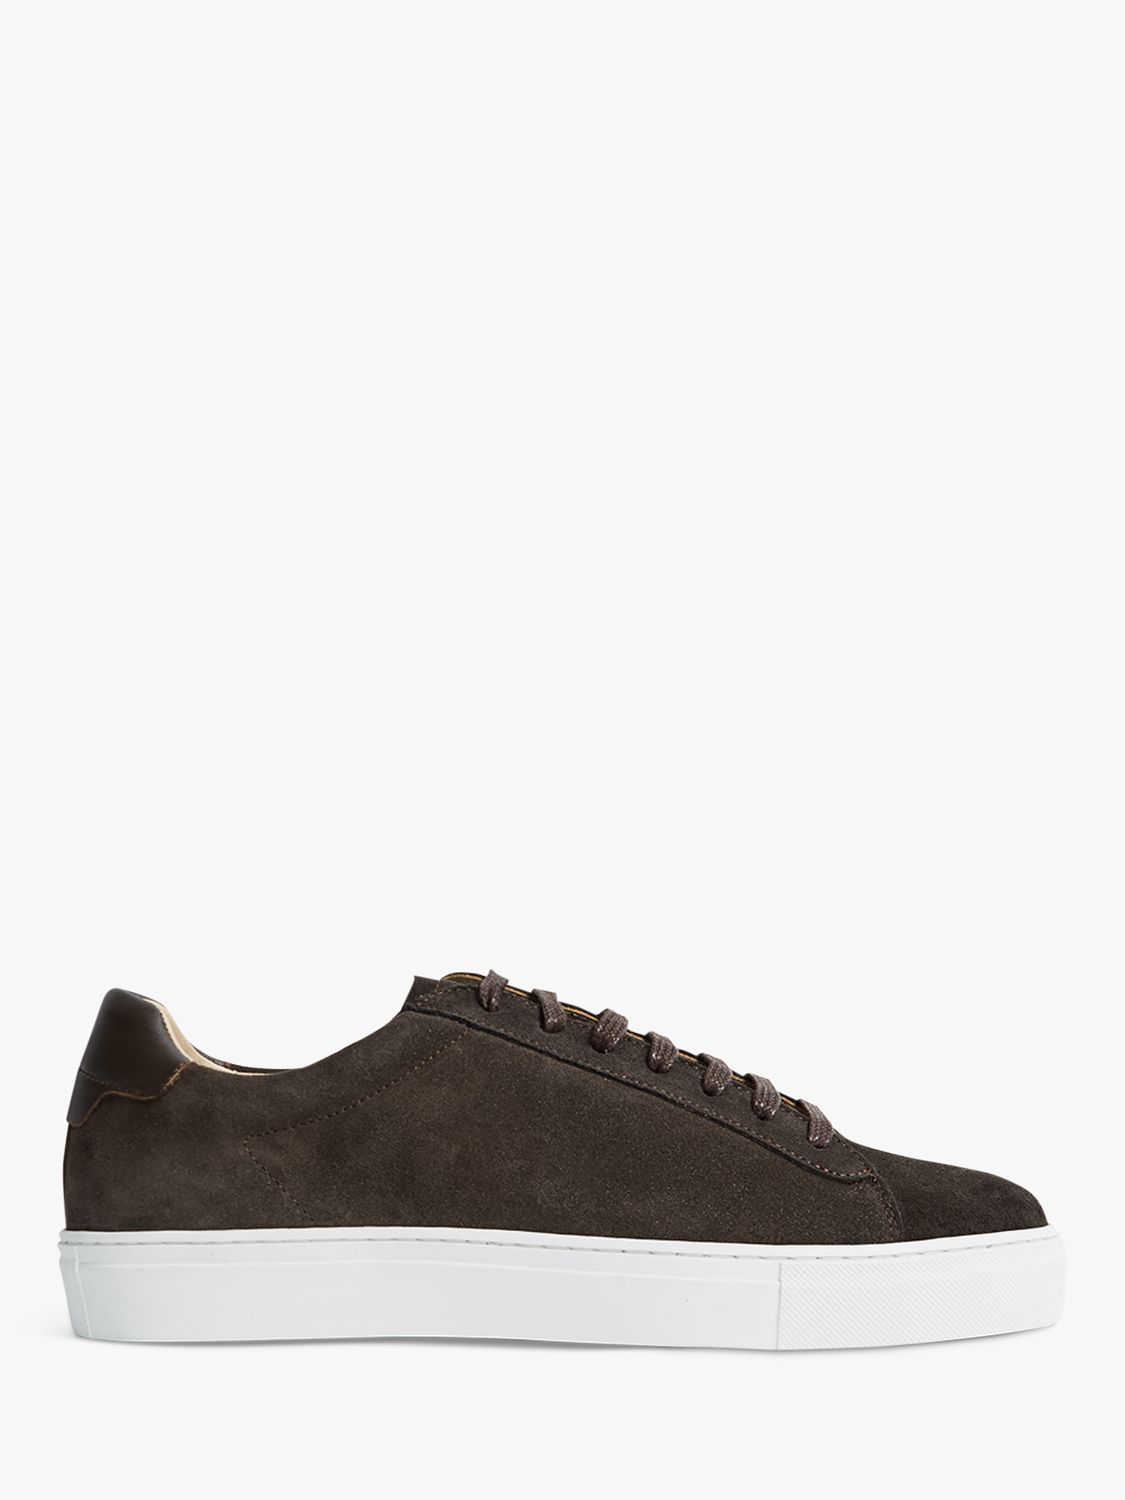 Reiss Finley Suede Trainers, Chocolate